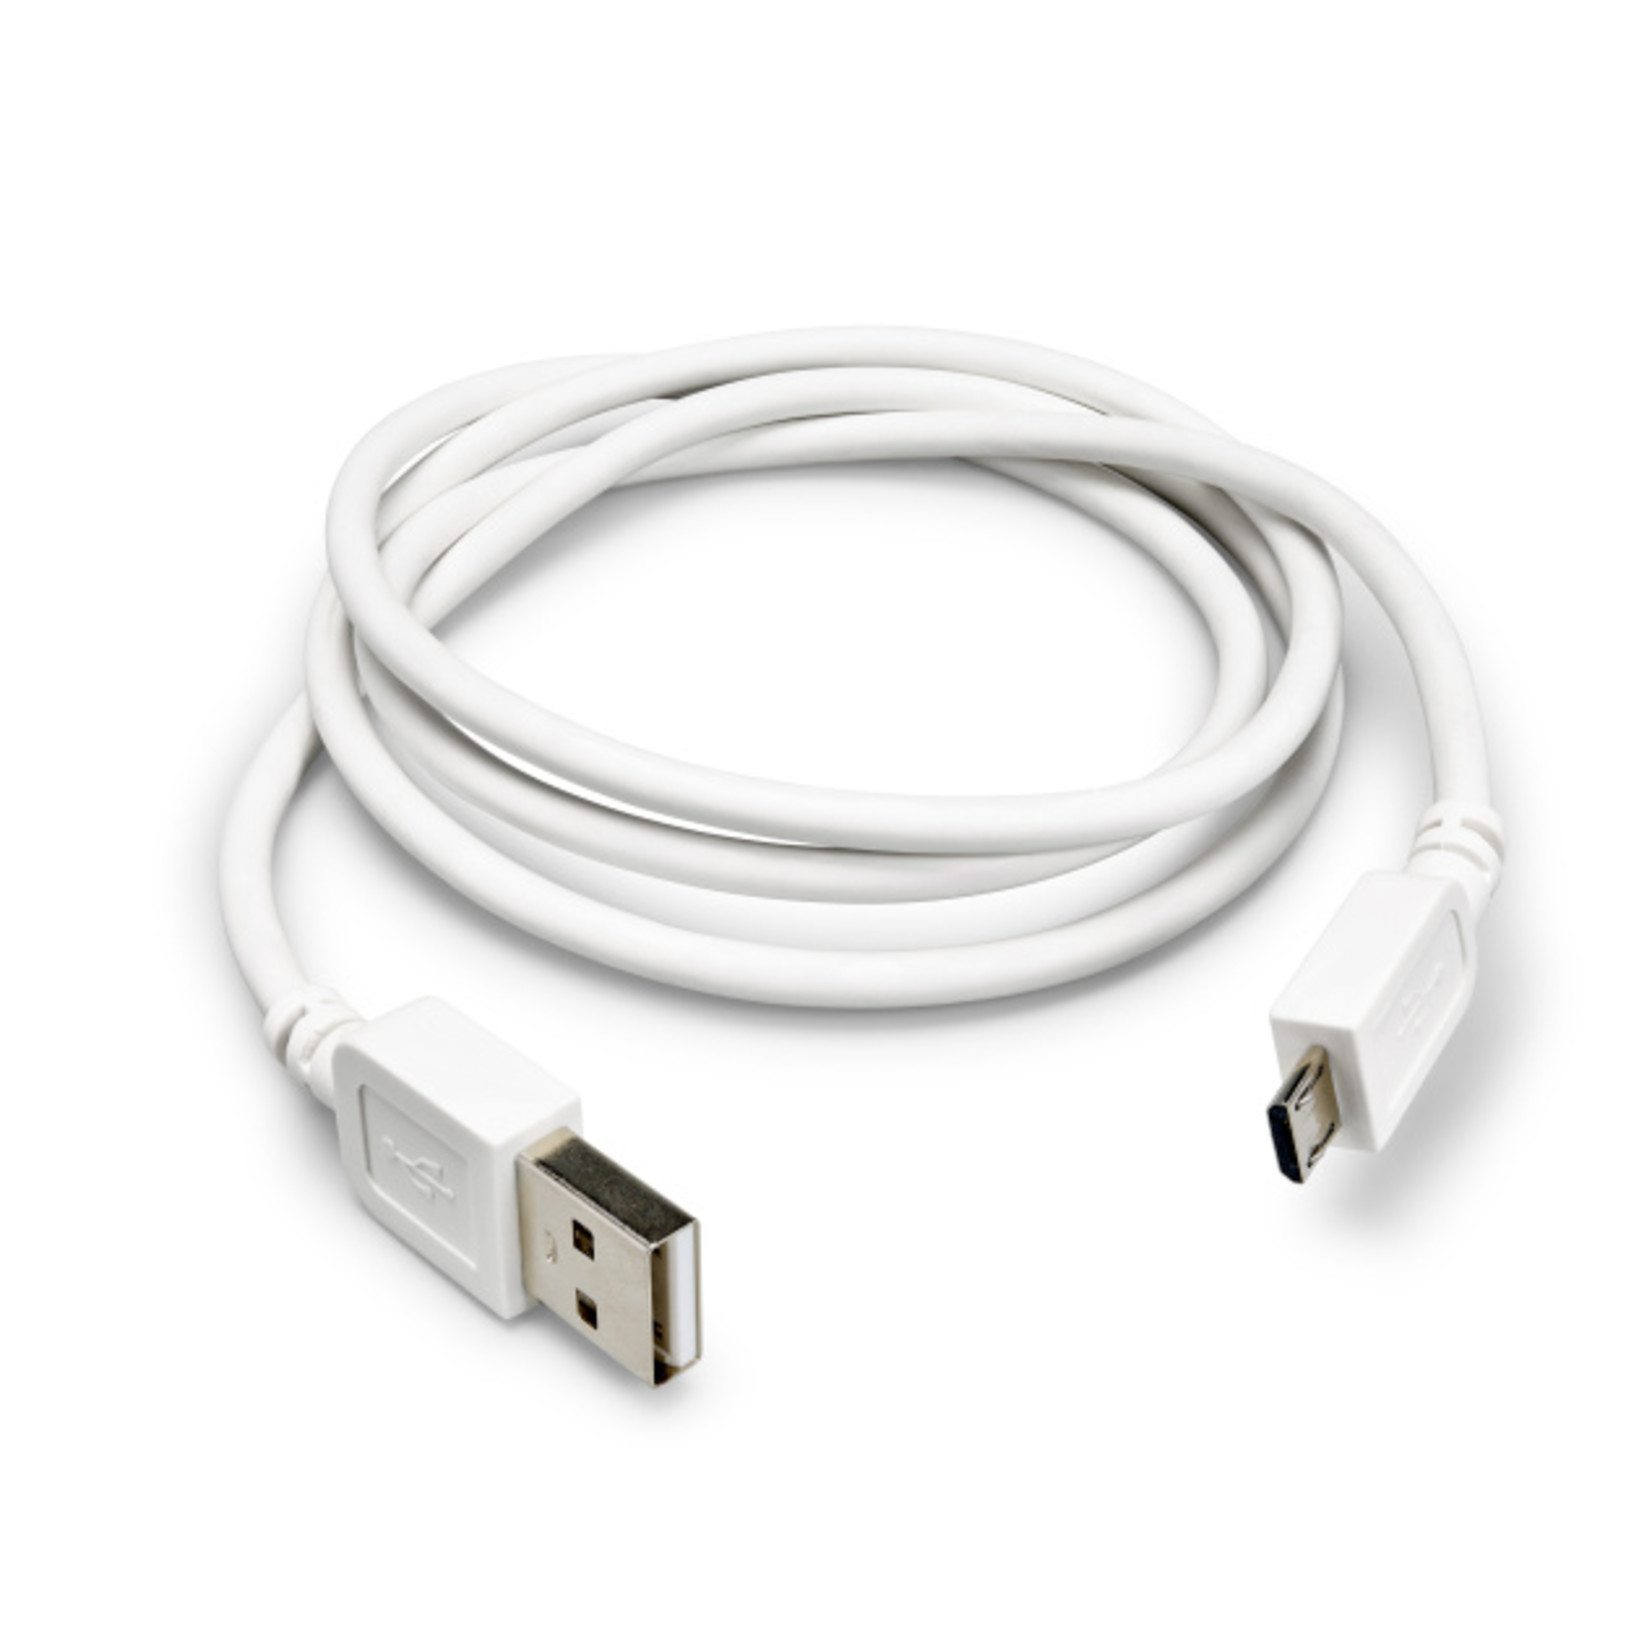 LEGO® Education Technic Micro USB Connector Cable